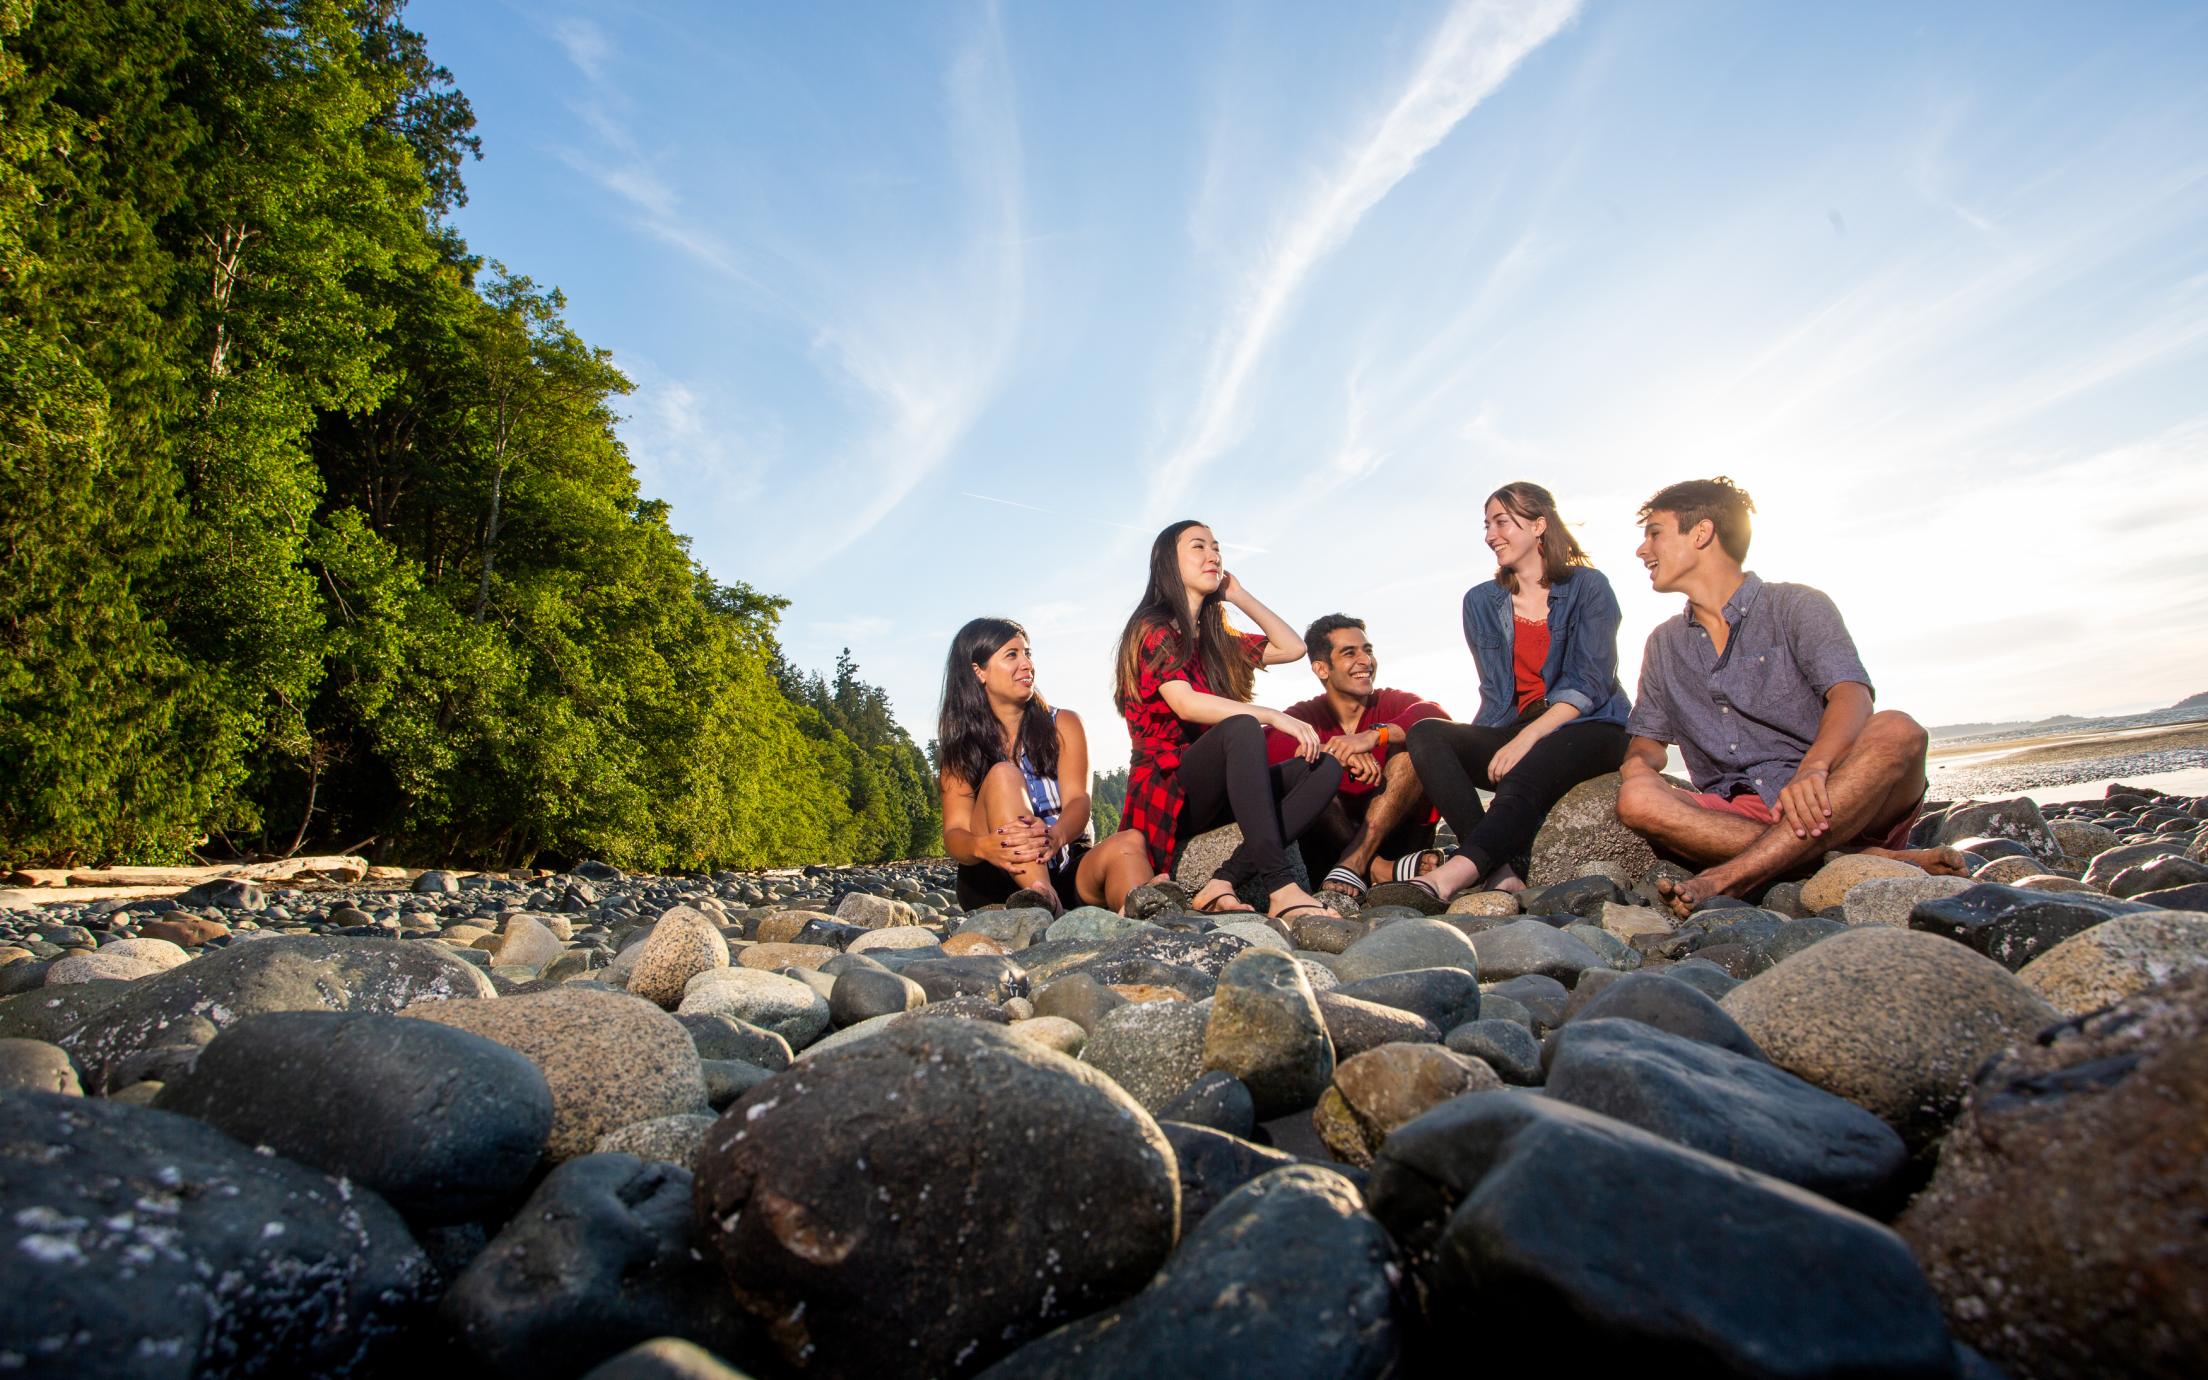 VIU Students Recreation at the Beach